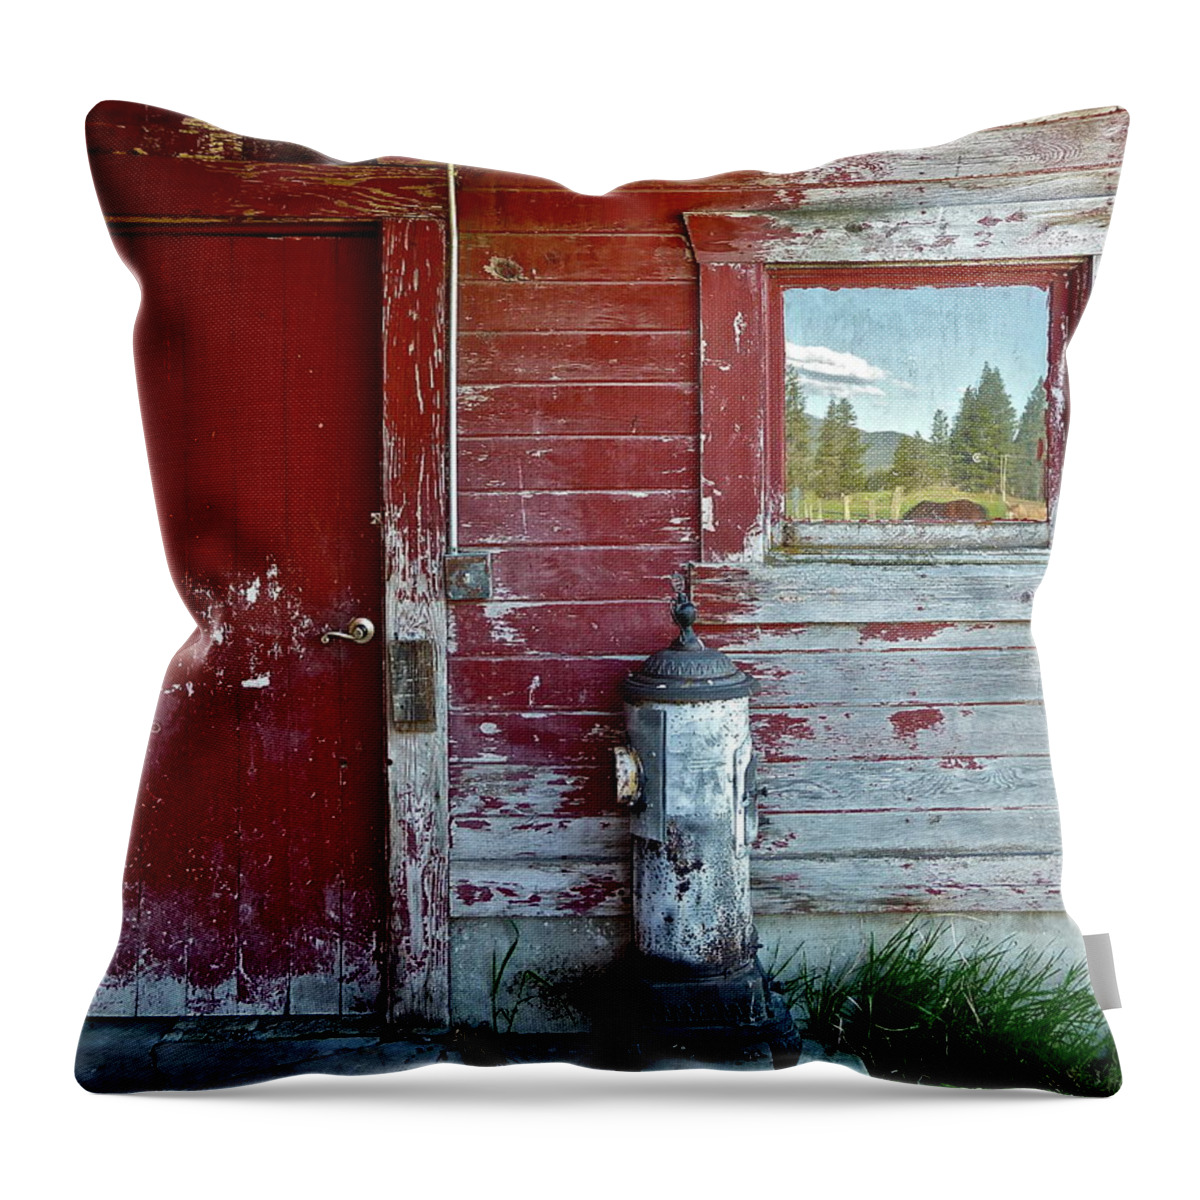 Barn Throw Pillow featuring the photograph Reflecting The Landscape by Diana Hatcher